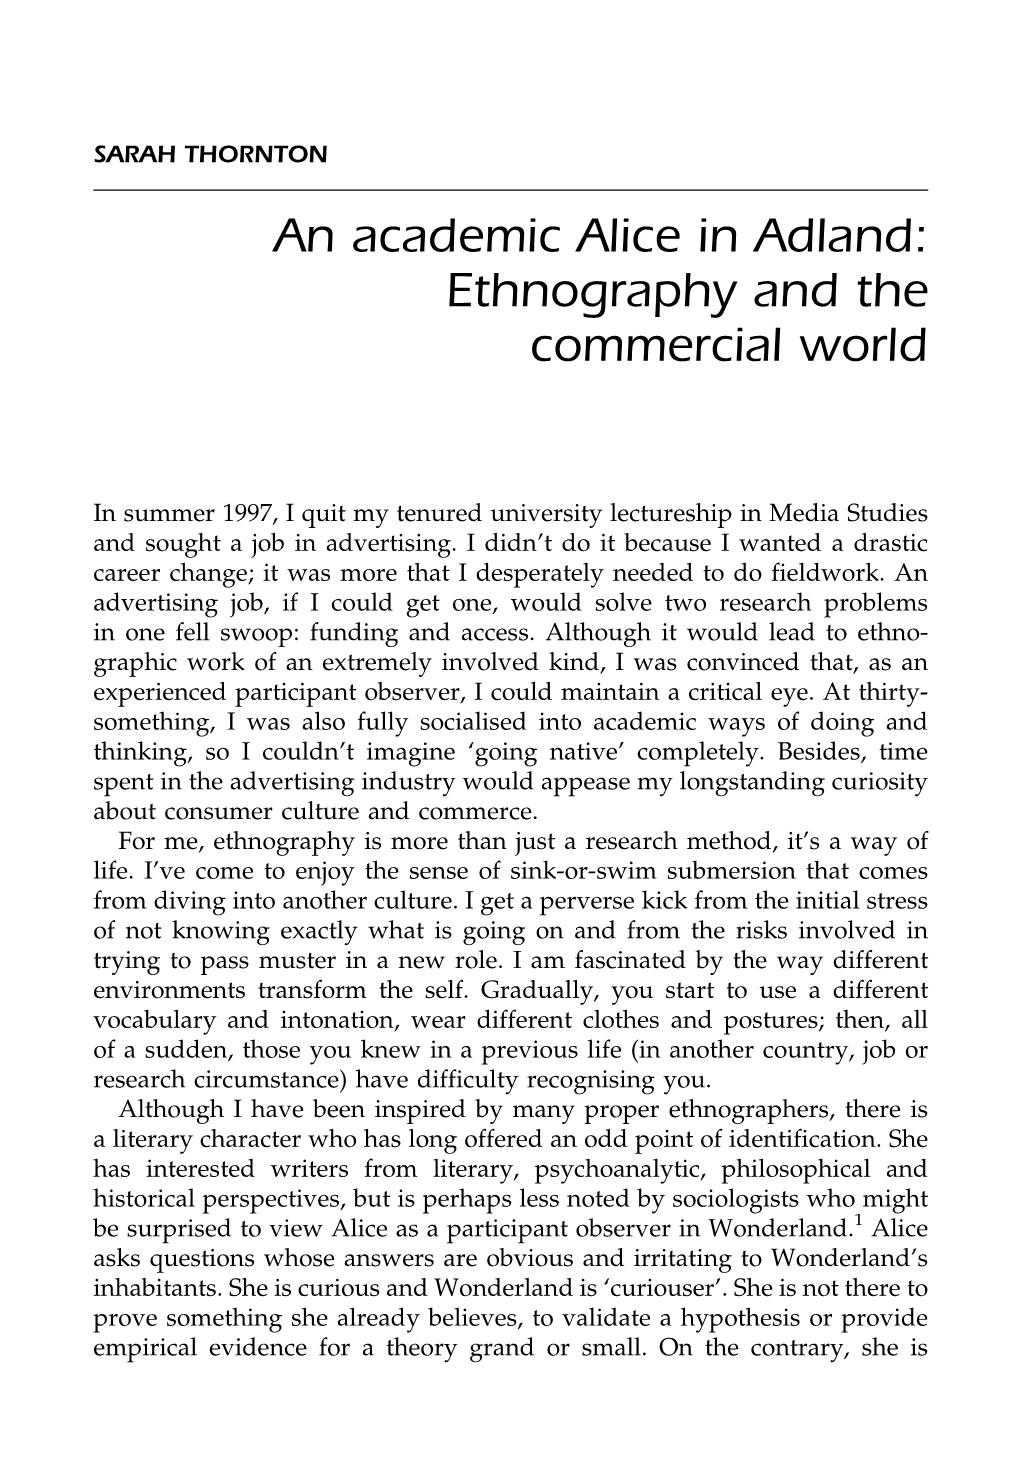 An Academic Alice in Adland: Ethnography and the Commercial World